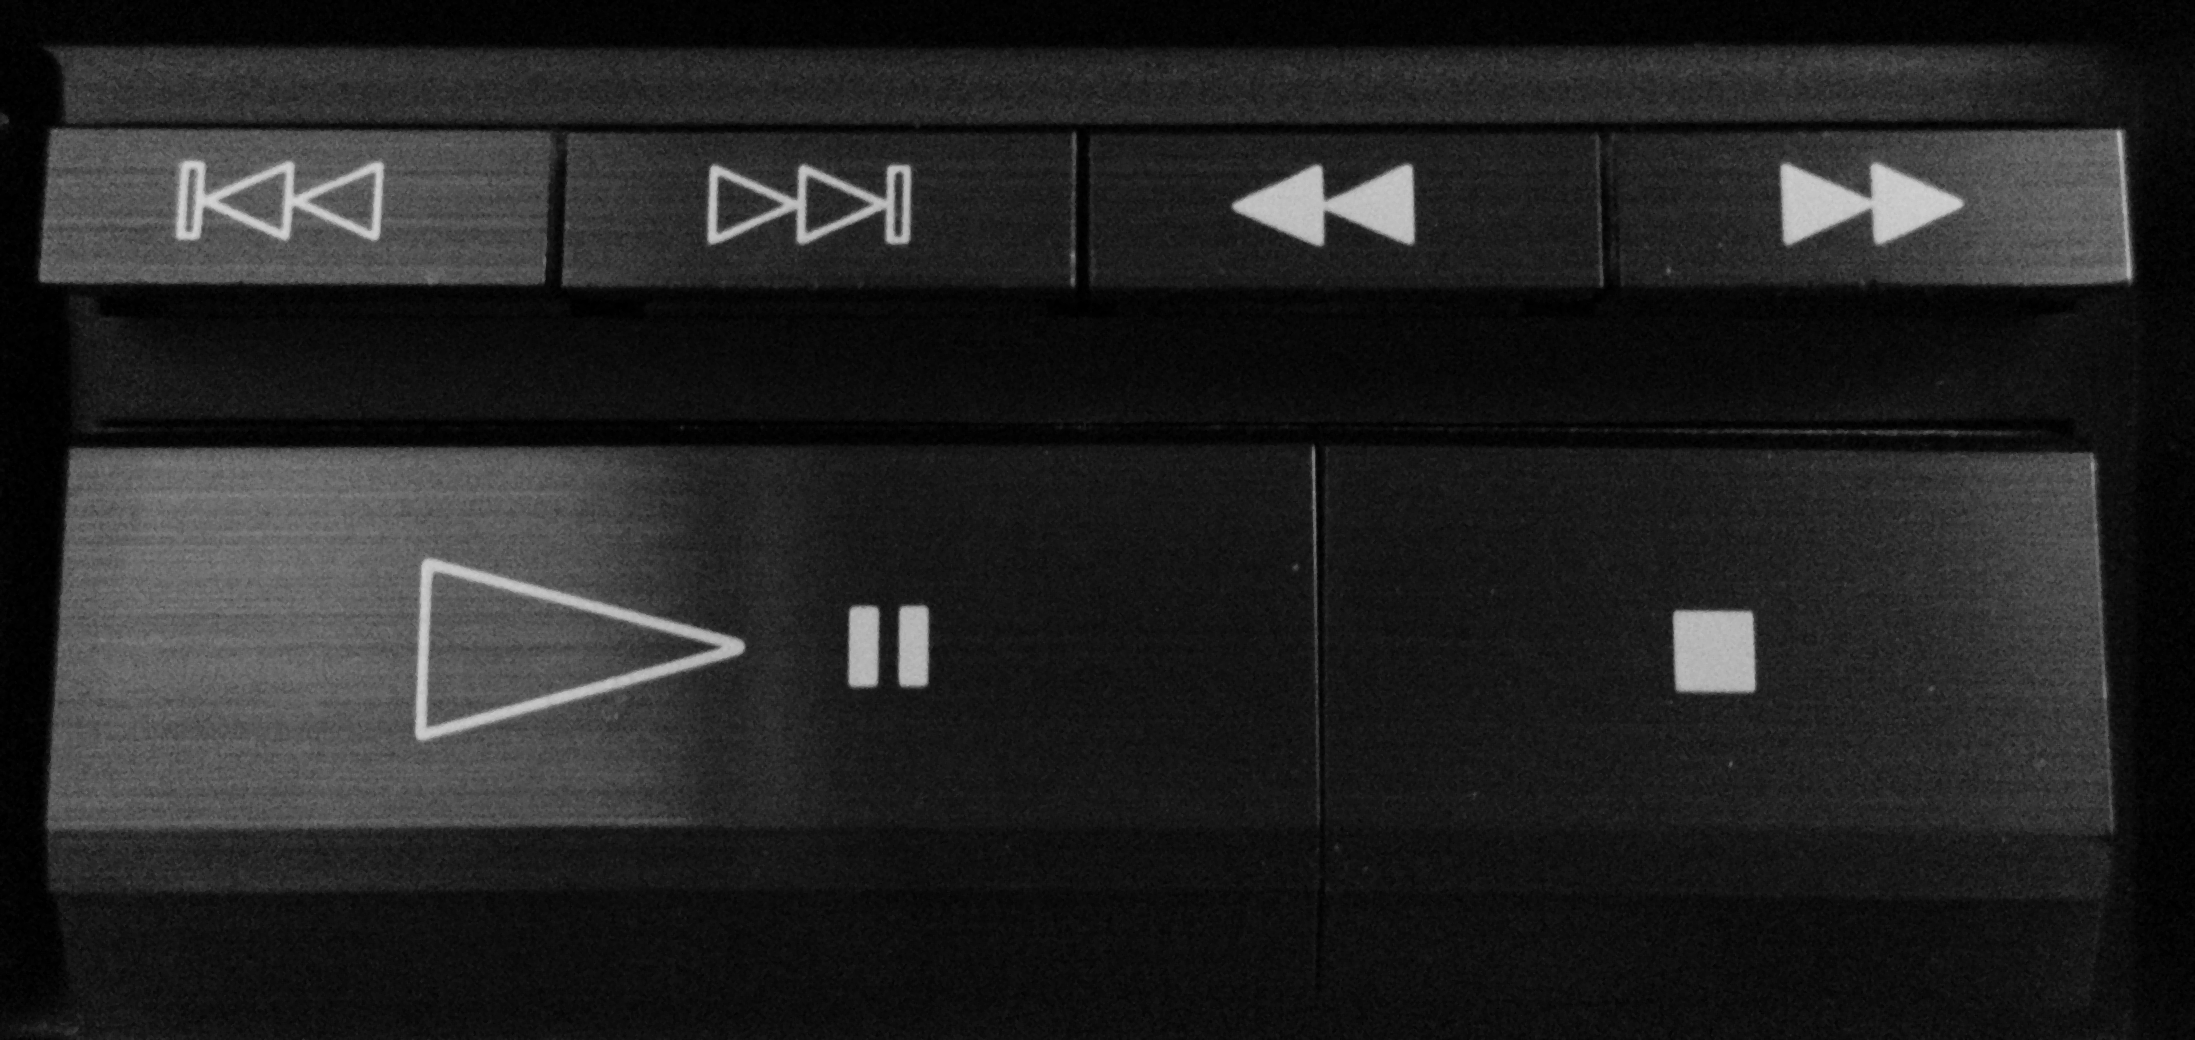 DVD icon or DVD player with a play button